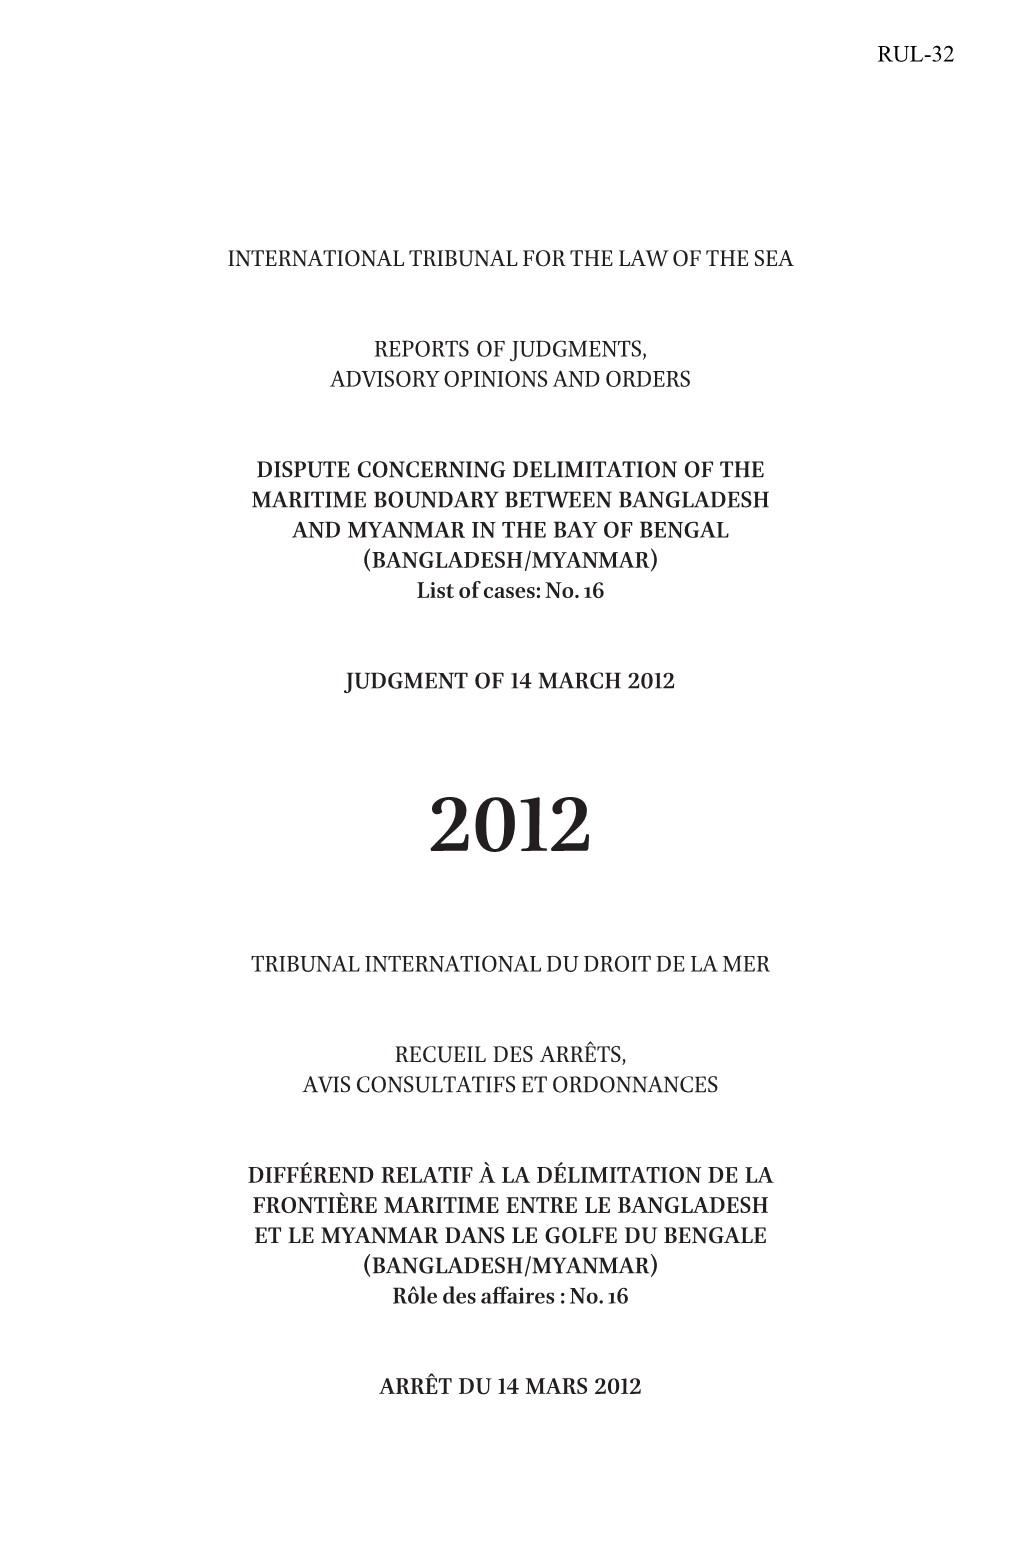 INTERNATIONAL TRIBUNAL for the LAW of the SEA REPORTS of JUDGMENTS, ADVISORY OPINIONS and ORDERS Dispute Concerning Delimitation